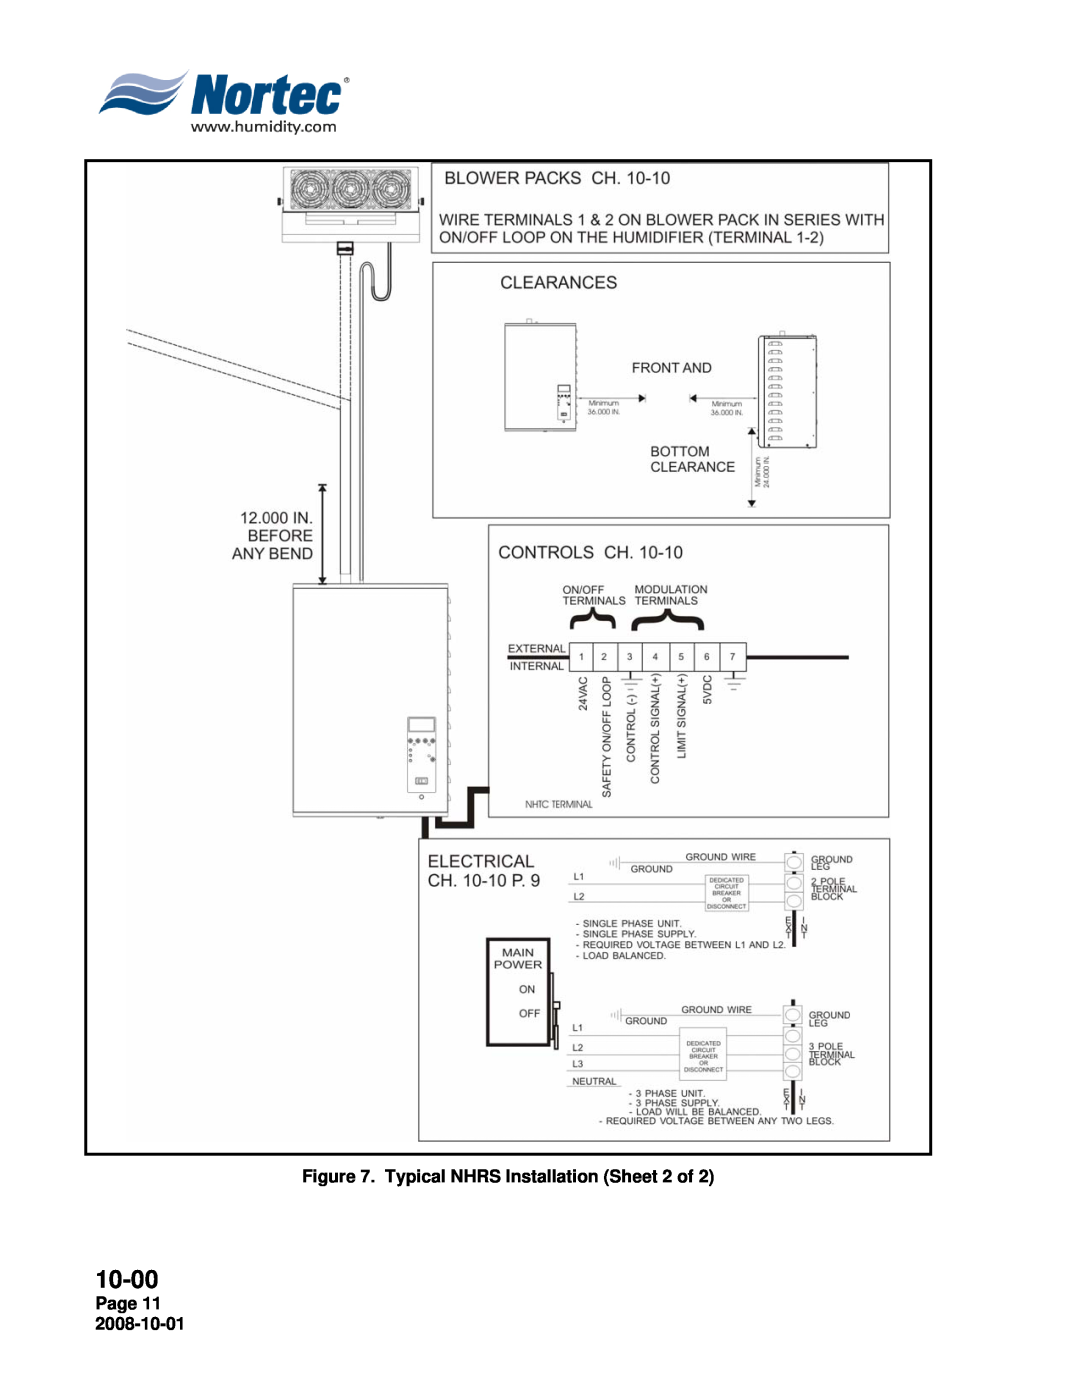 Nortec NHTC, NHPC manual 10-00, Typical NHRS Installation Sheet 2 of, Page 11 